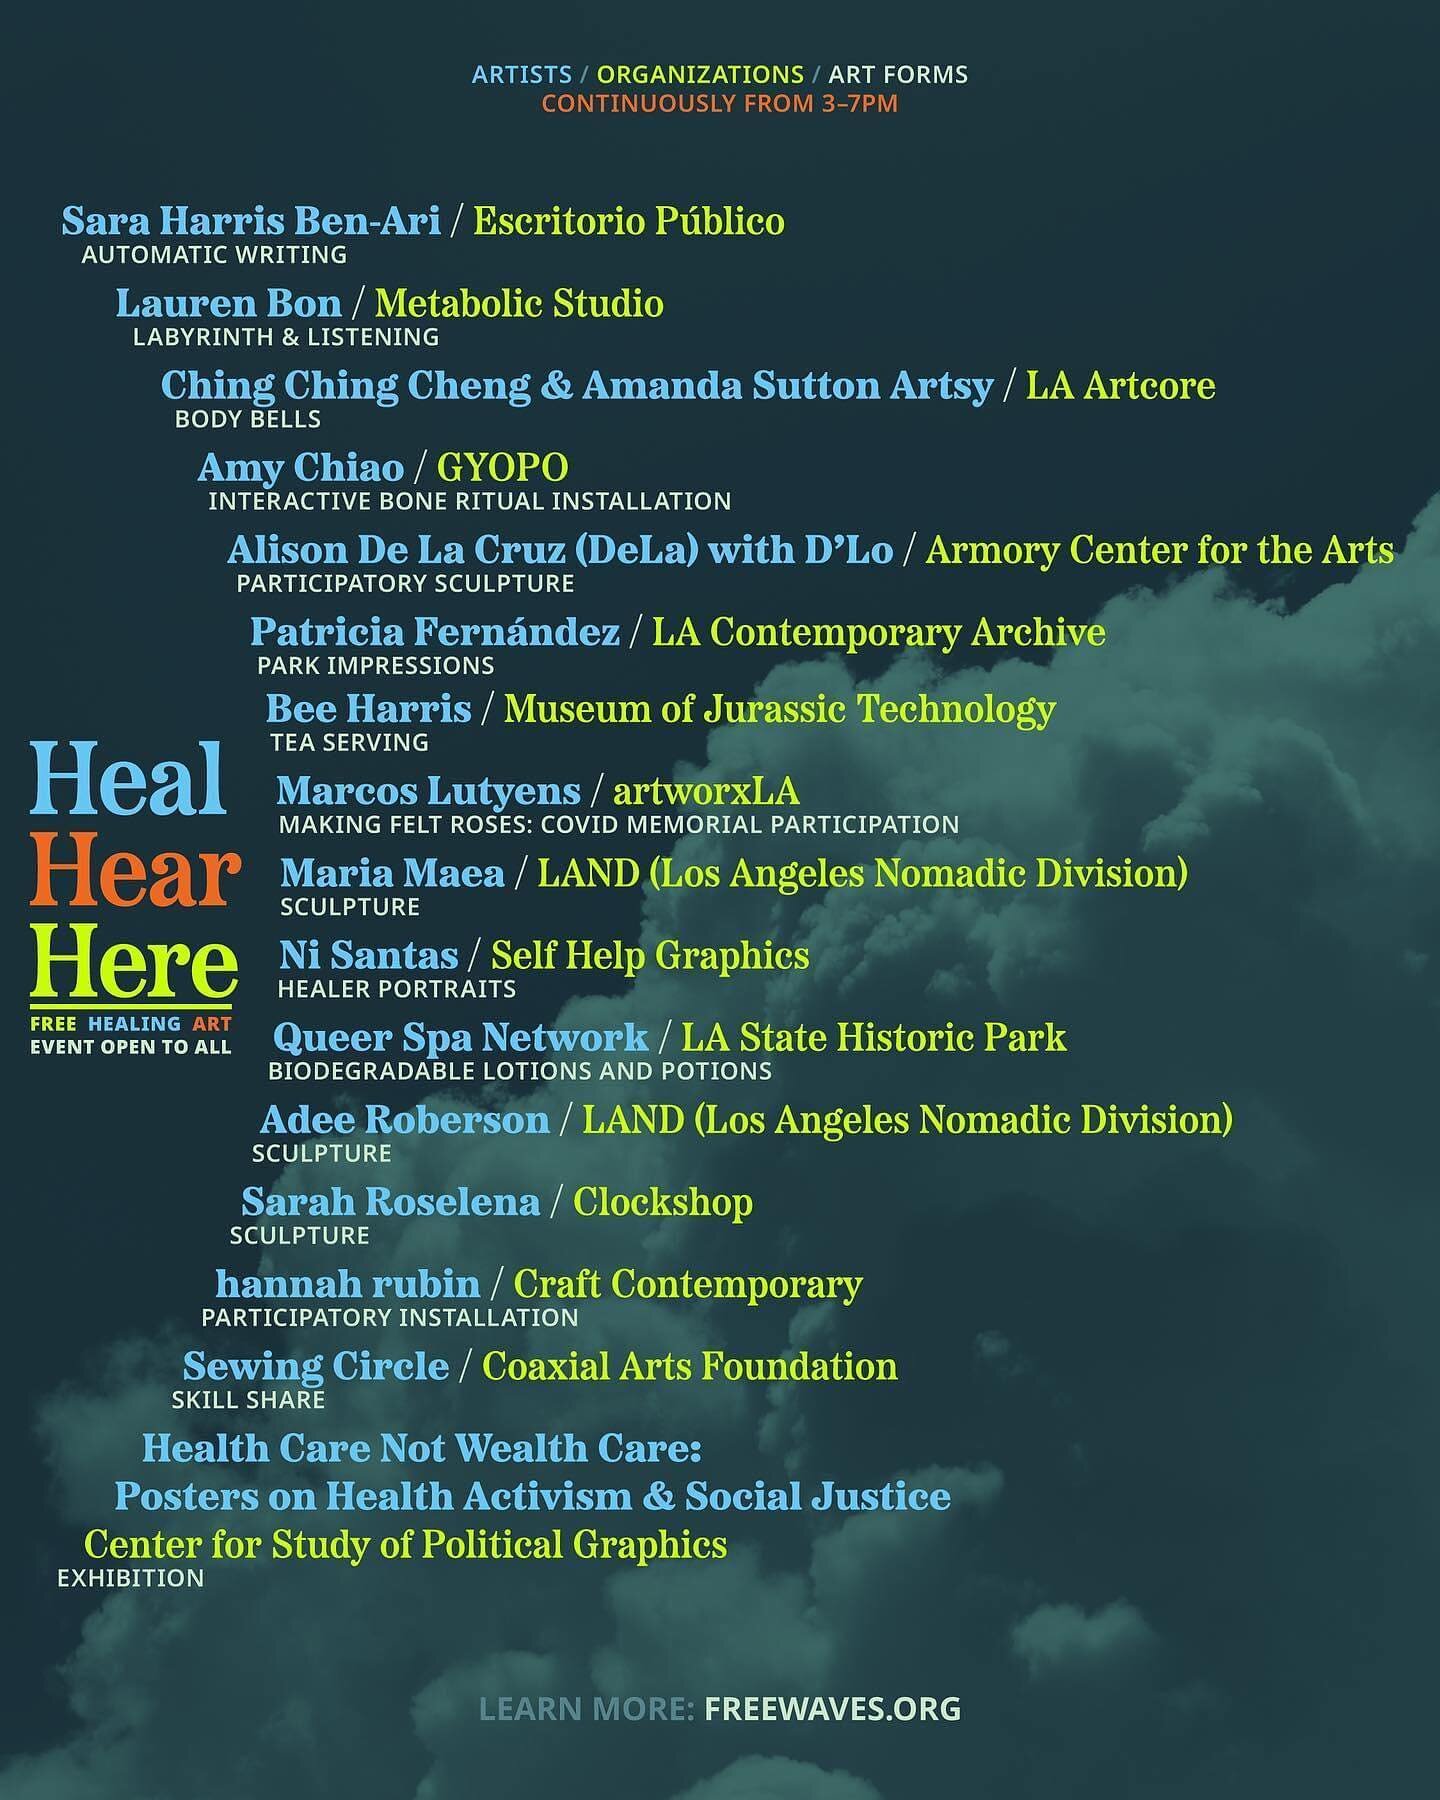 Heal Hear Here - TODAY! 
🌞⛈️🌙

 🌿SCHEDULE 🌿

Join us for &ldquo;Heal Hear Hear&rdquo; this Saturday (5/20) from 3-7 pm at @lastatehistoricpark ☀️

This event is FREE and open to all! Link to RSVP in our bio 🎟️

Featuring artists + collectives: 
